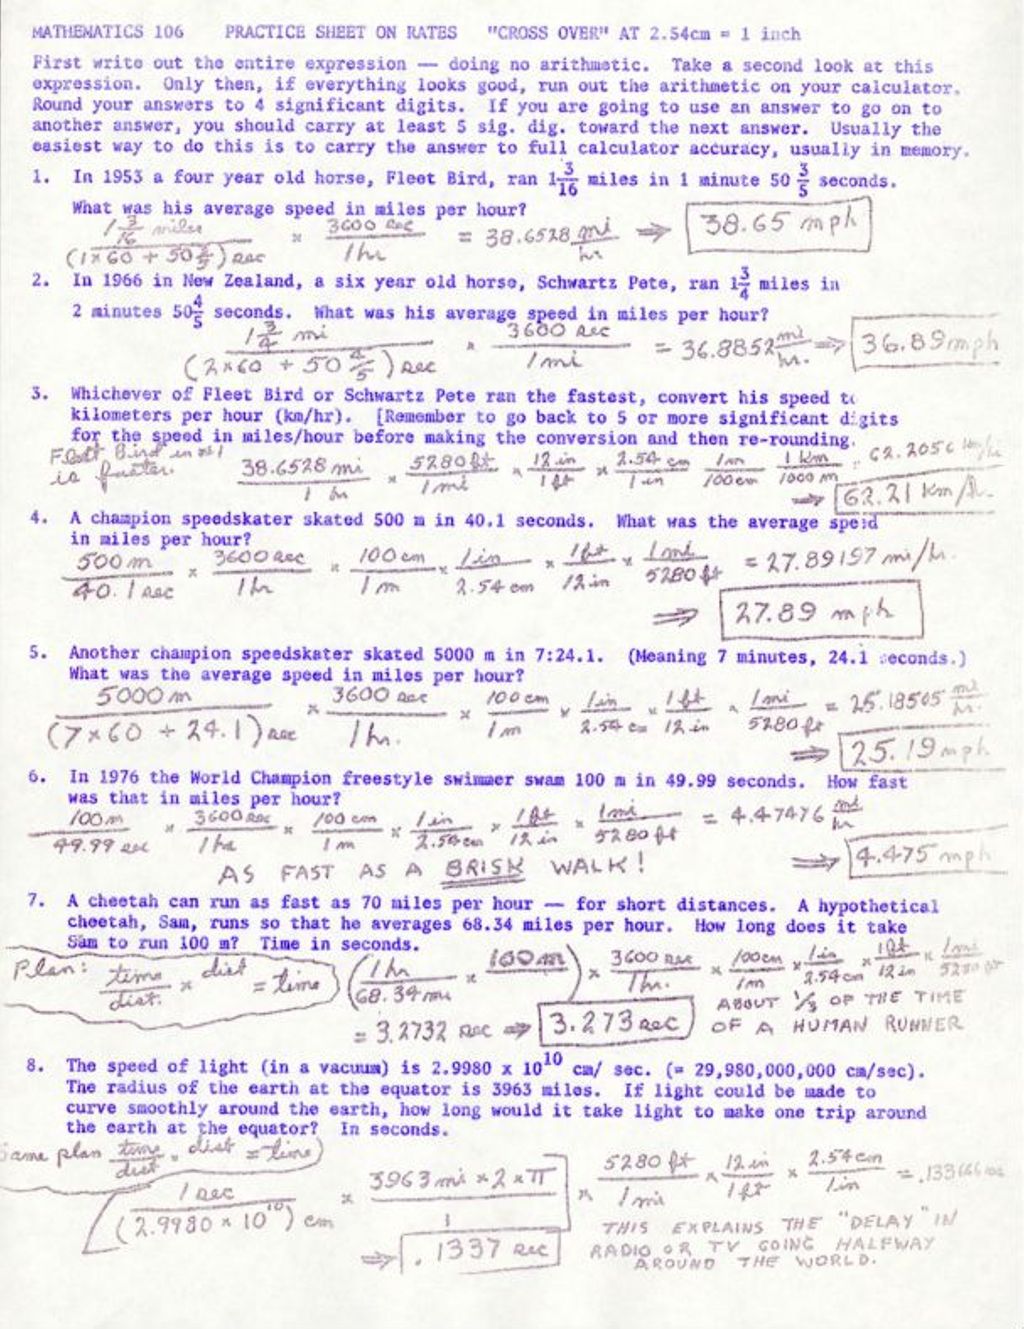 Miniature of Math 106 Practice Sheet on Rates “Cross Over” with AK